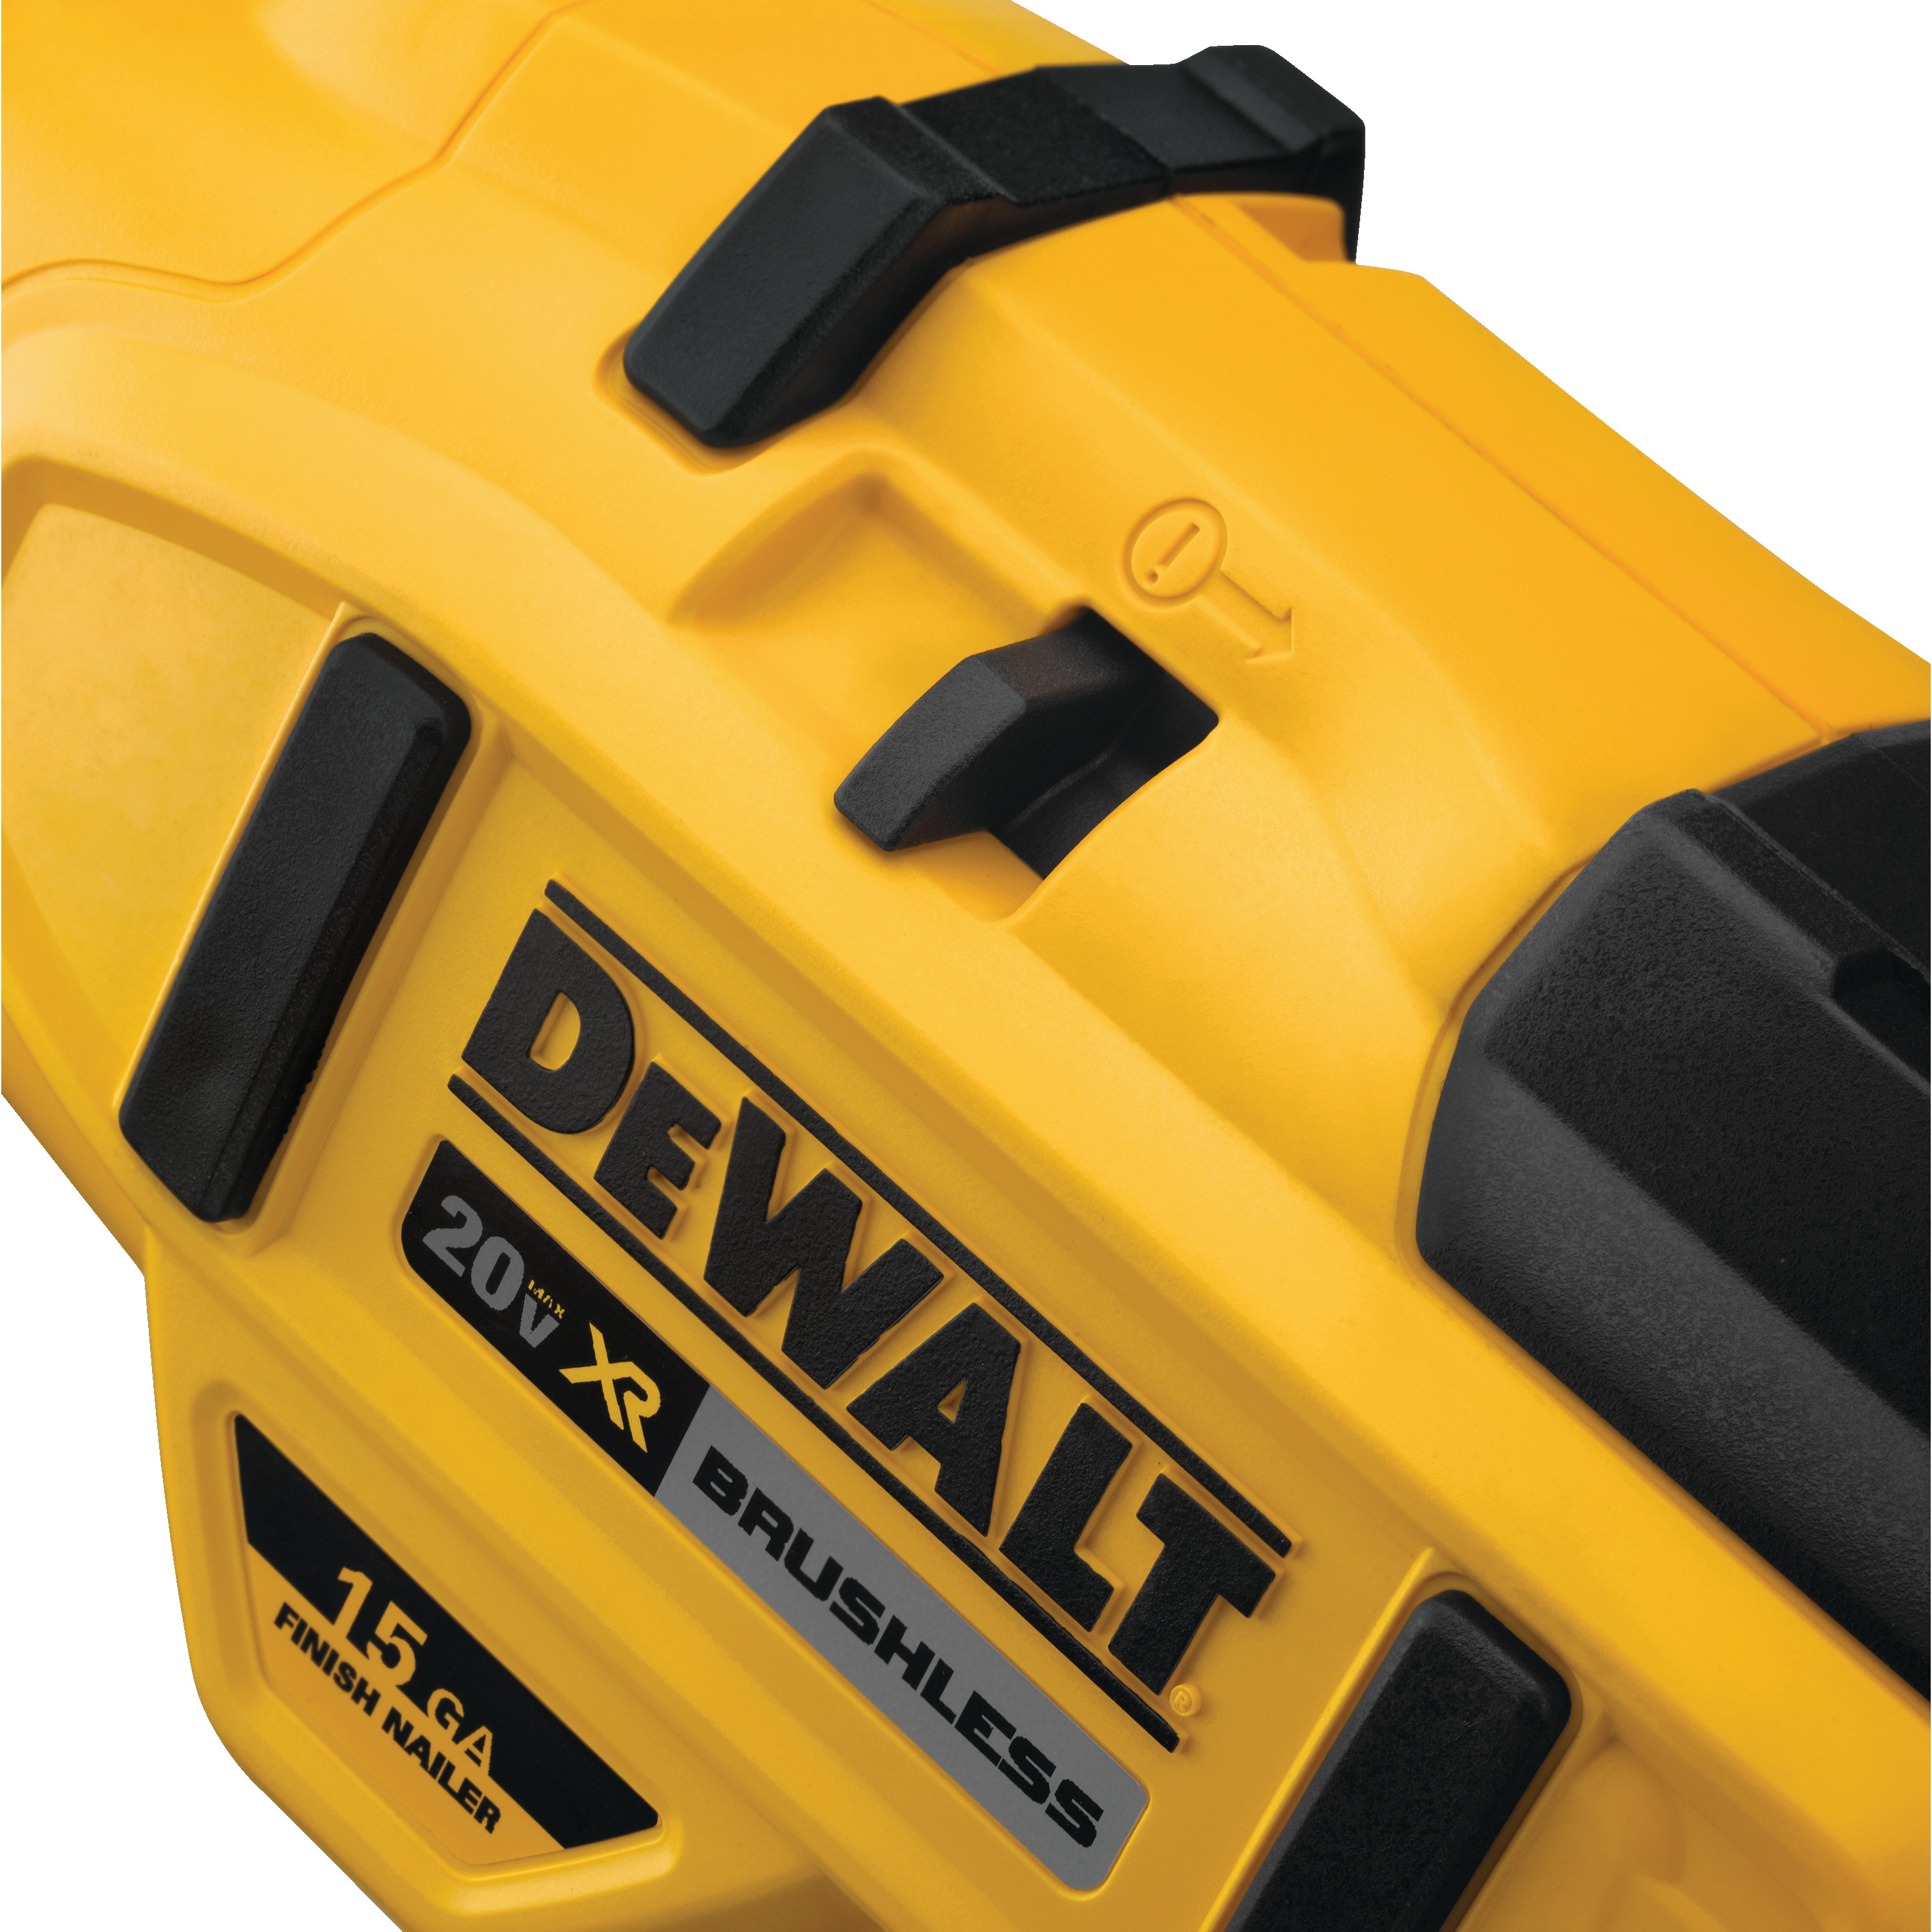 Close up of jam release trigger feature of a  XR Cordless 15 Gauge Angled Finish Nailer